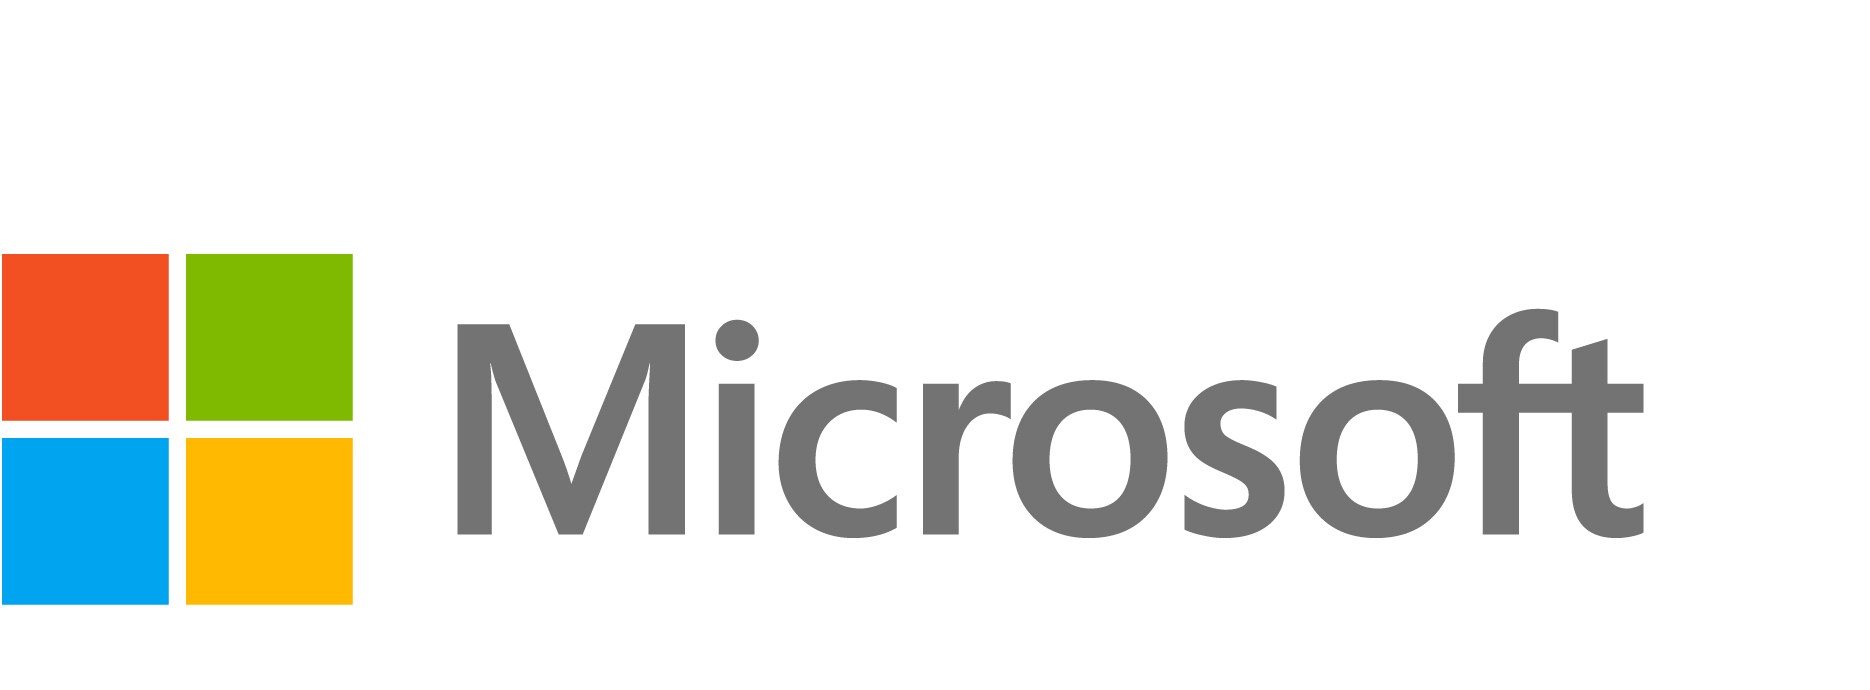 Microsoft Identity Manager - license & software assurance - 1 user CAL